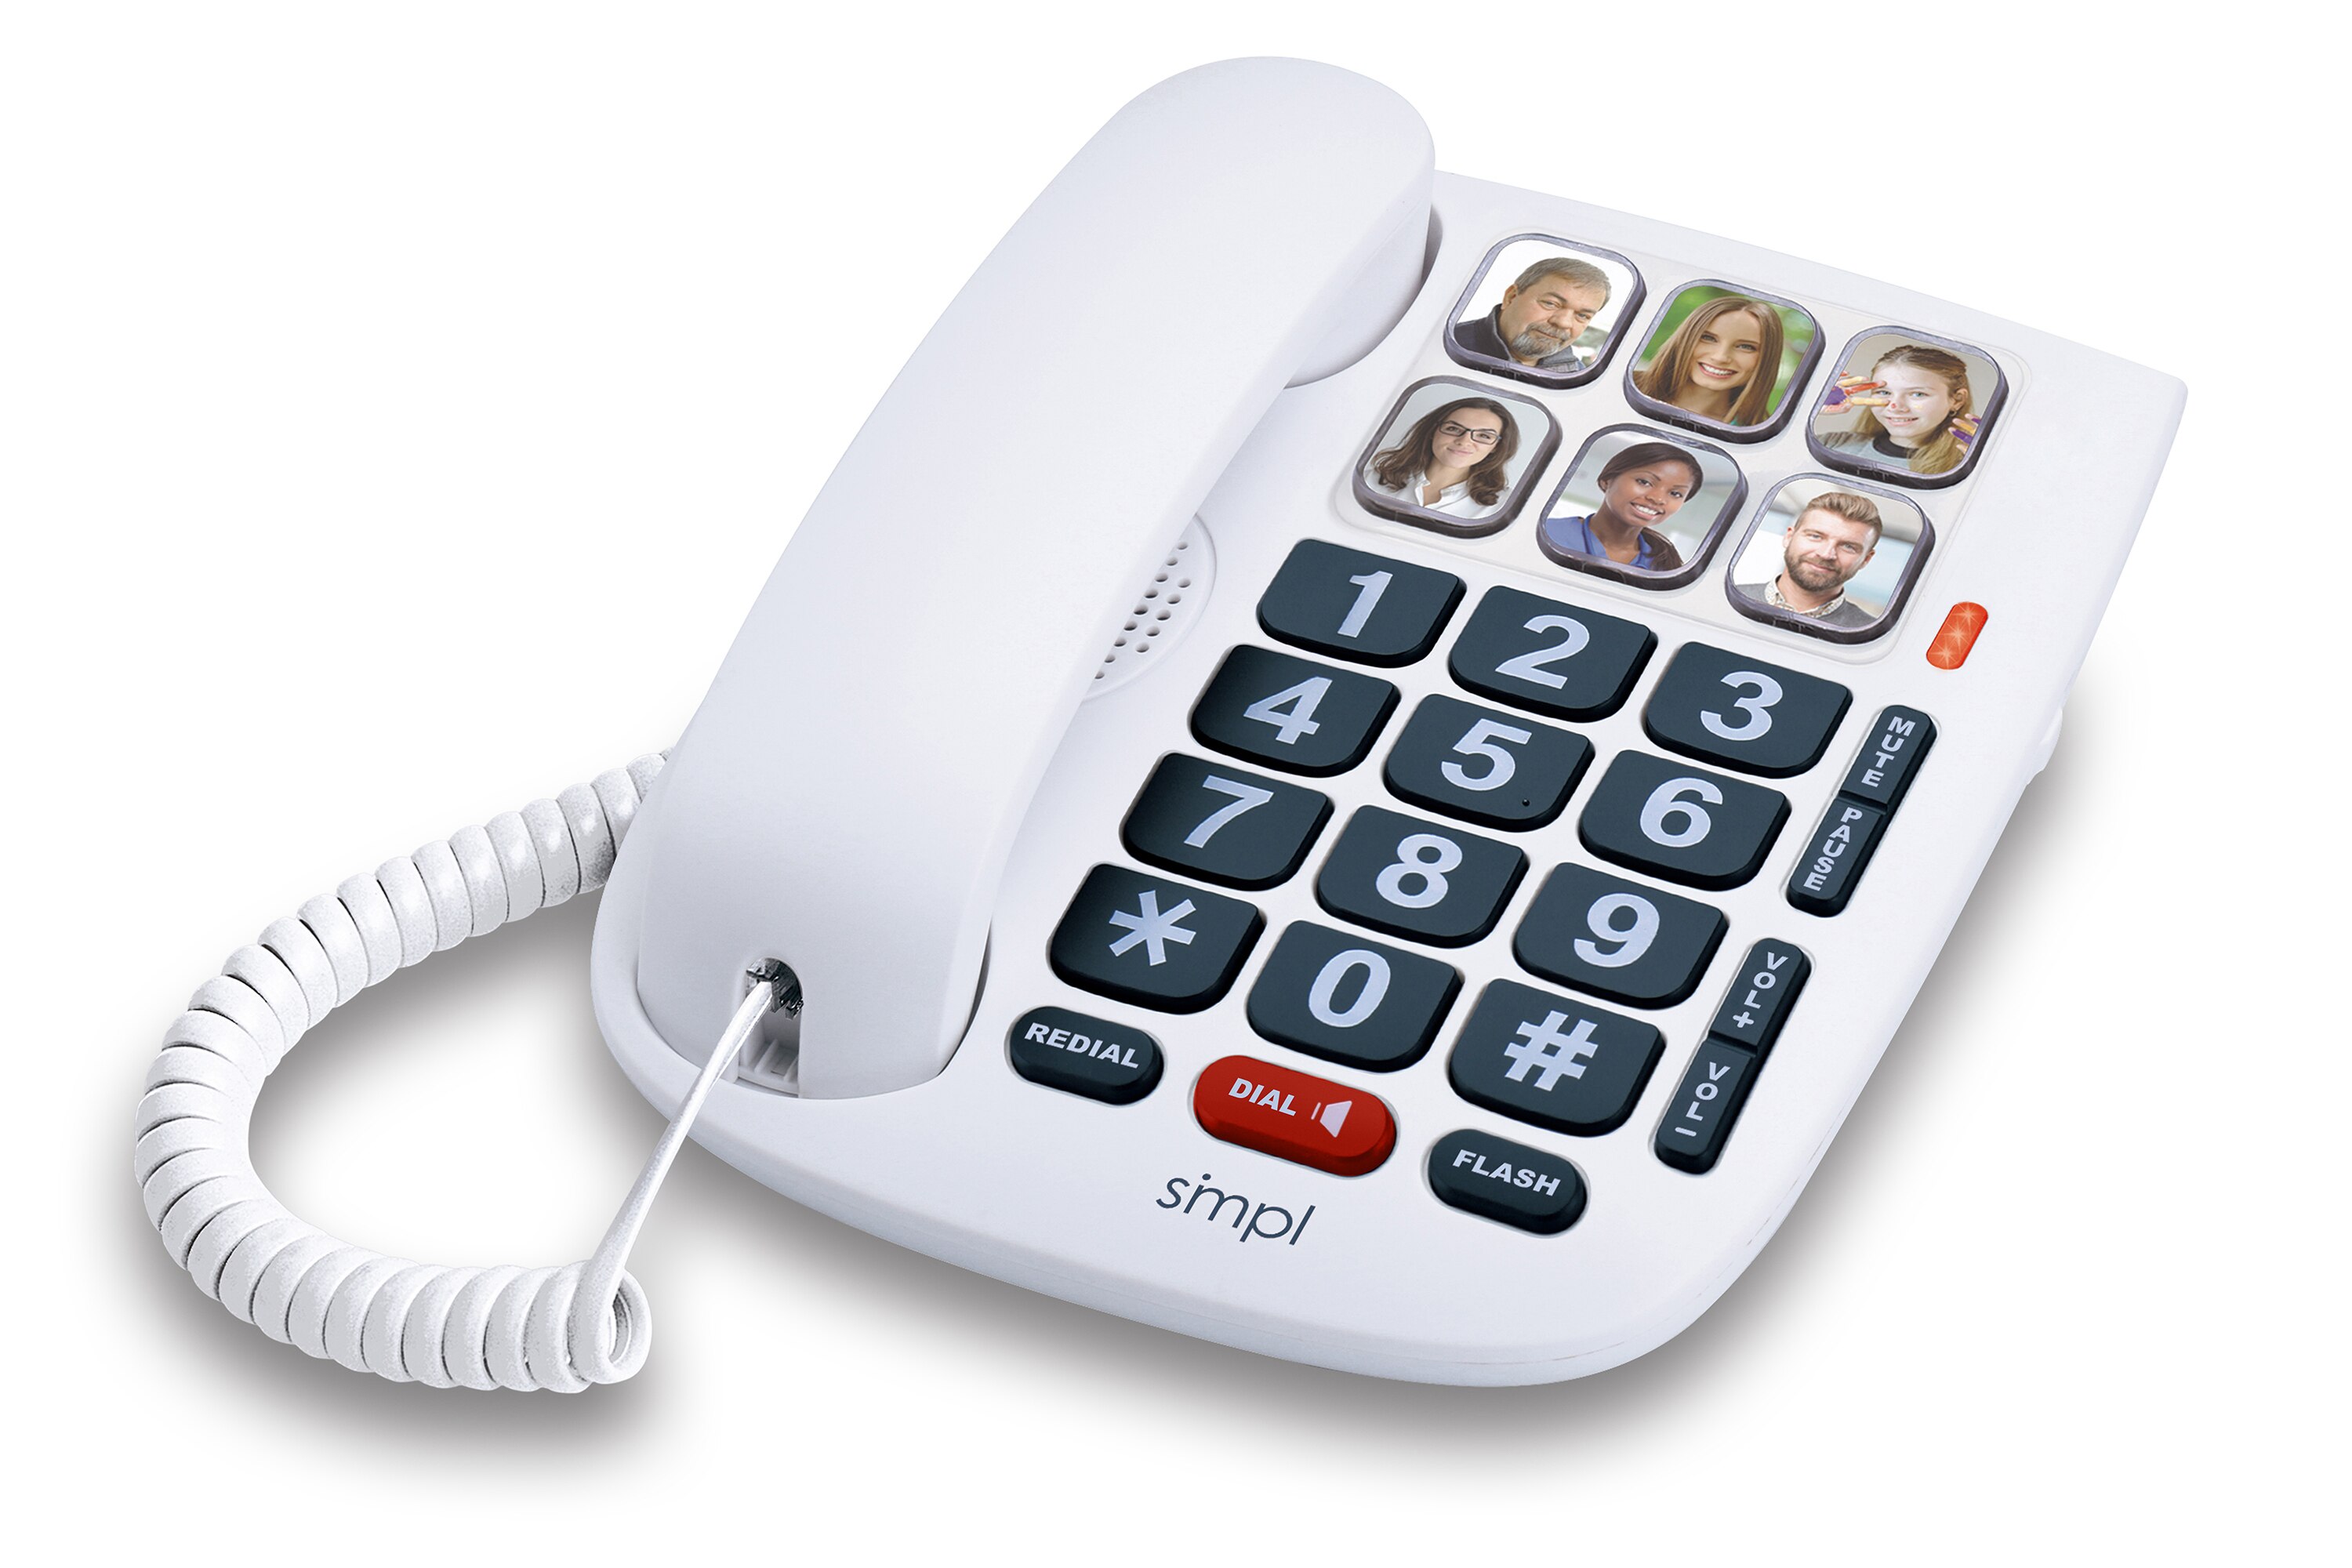 SiMPL photoDIAL Memory Landline Phone One-Touch Handsfree Dialing